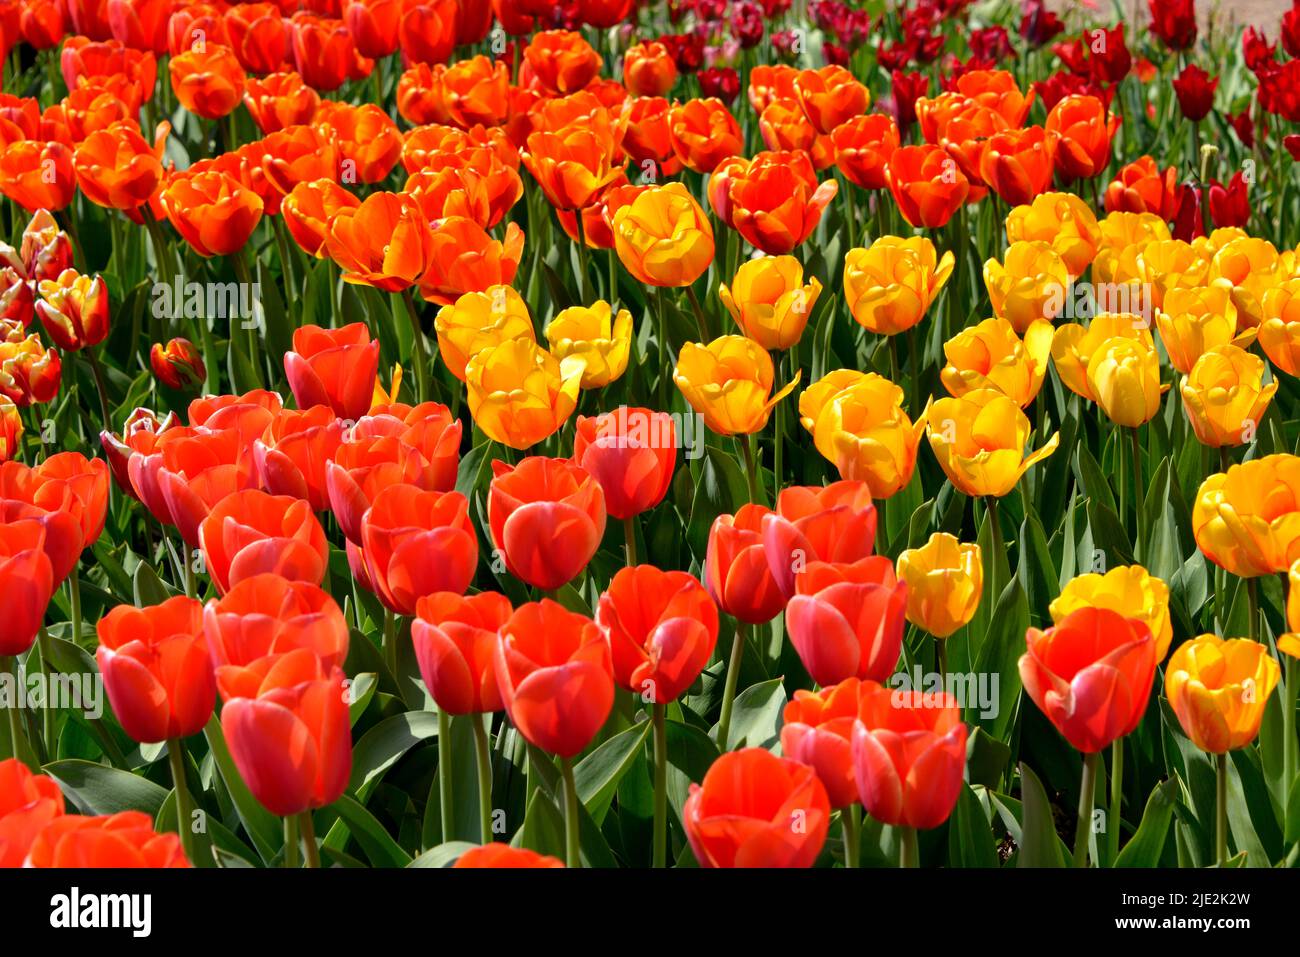 Cultivated of red and yellow tulips (Tulipa) Stock Photo